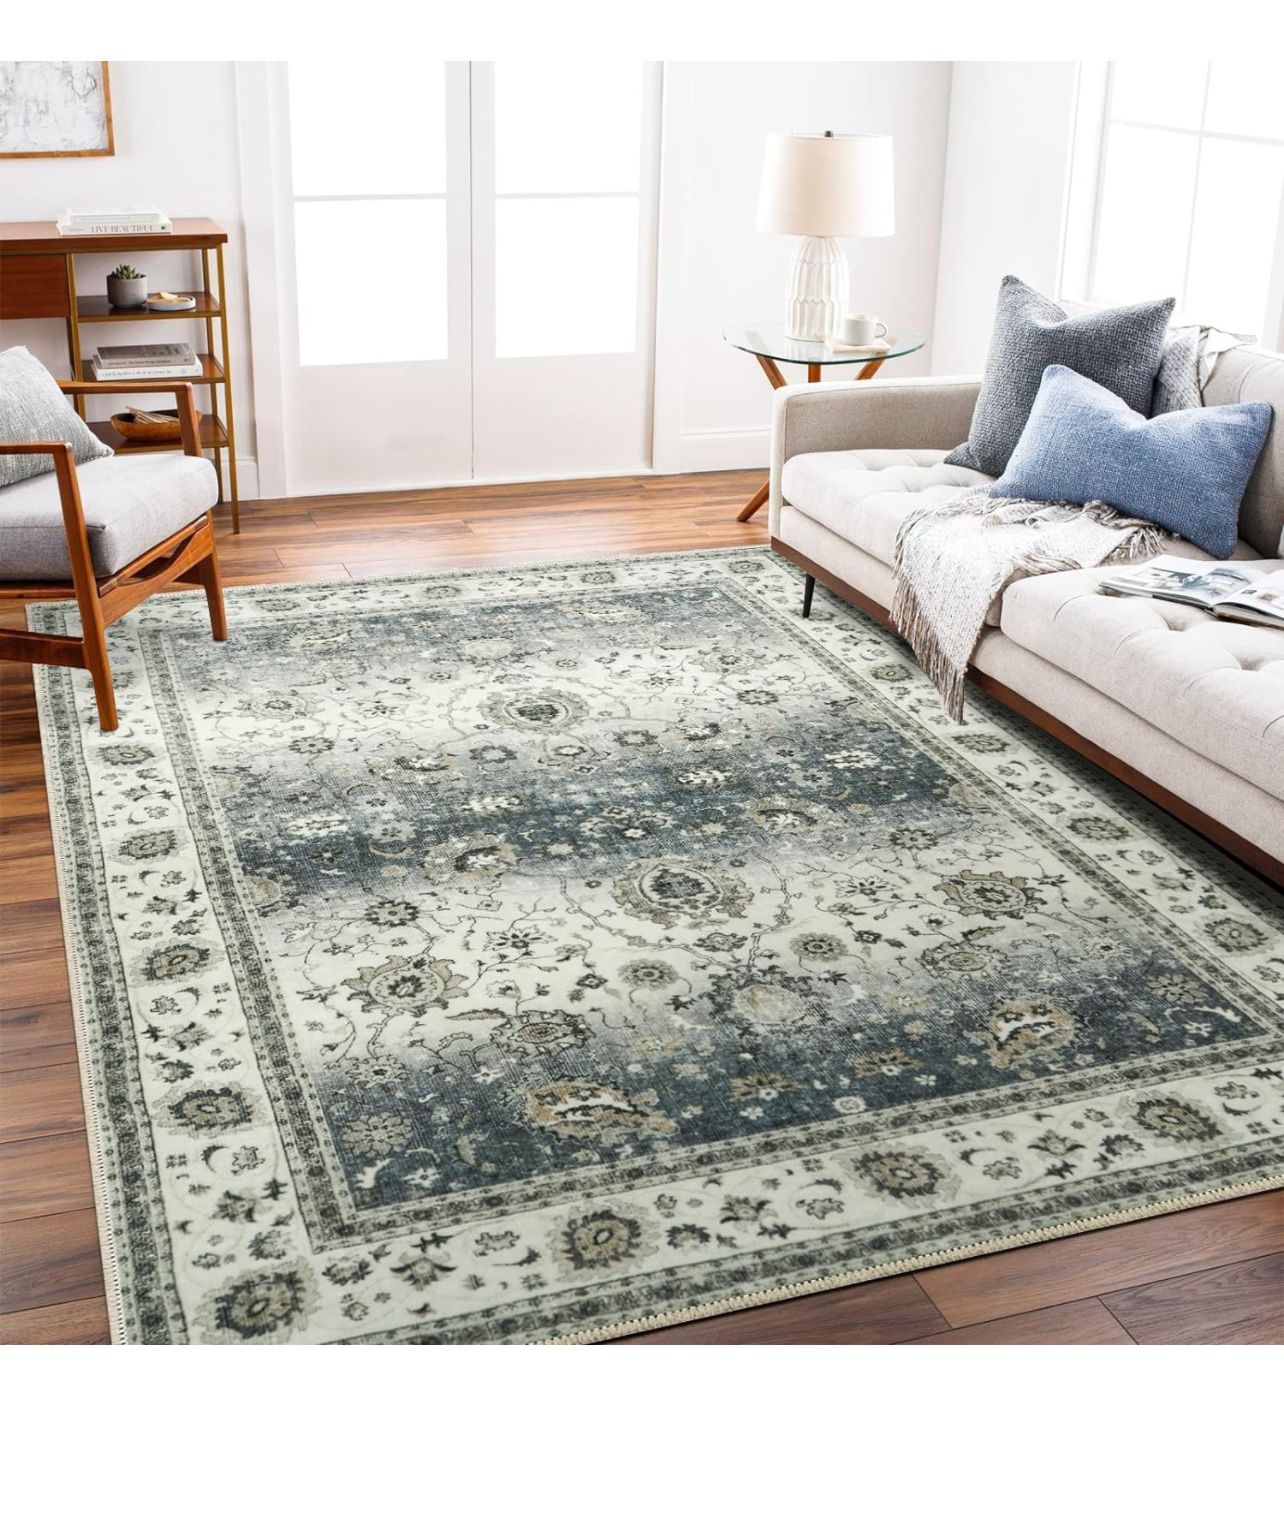 Brandnew Washable Area Rug 5x7 for Living Room Non Slip Runner Rugs with Rubber Backing for Bedroom Soft Kitchen Runner Rug Stain Resistant Non Sheddi